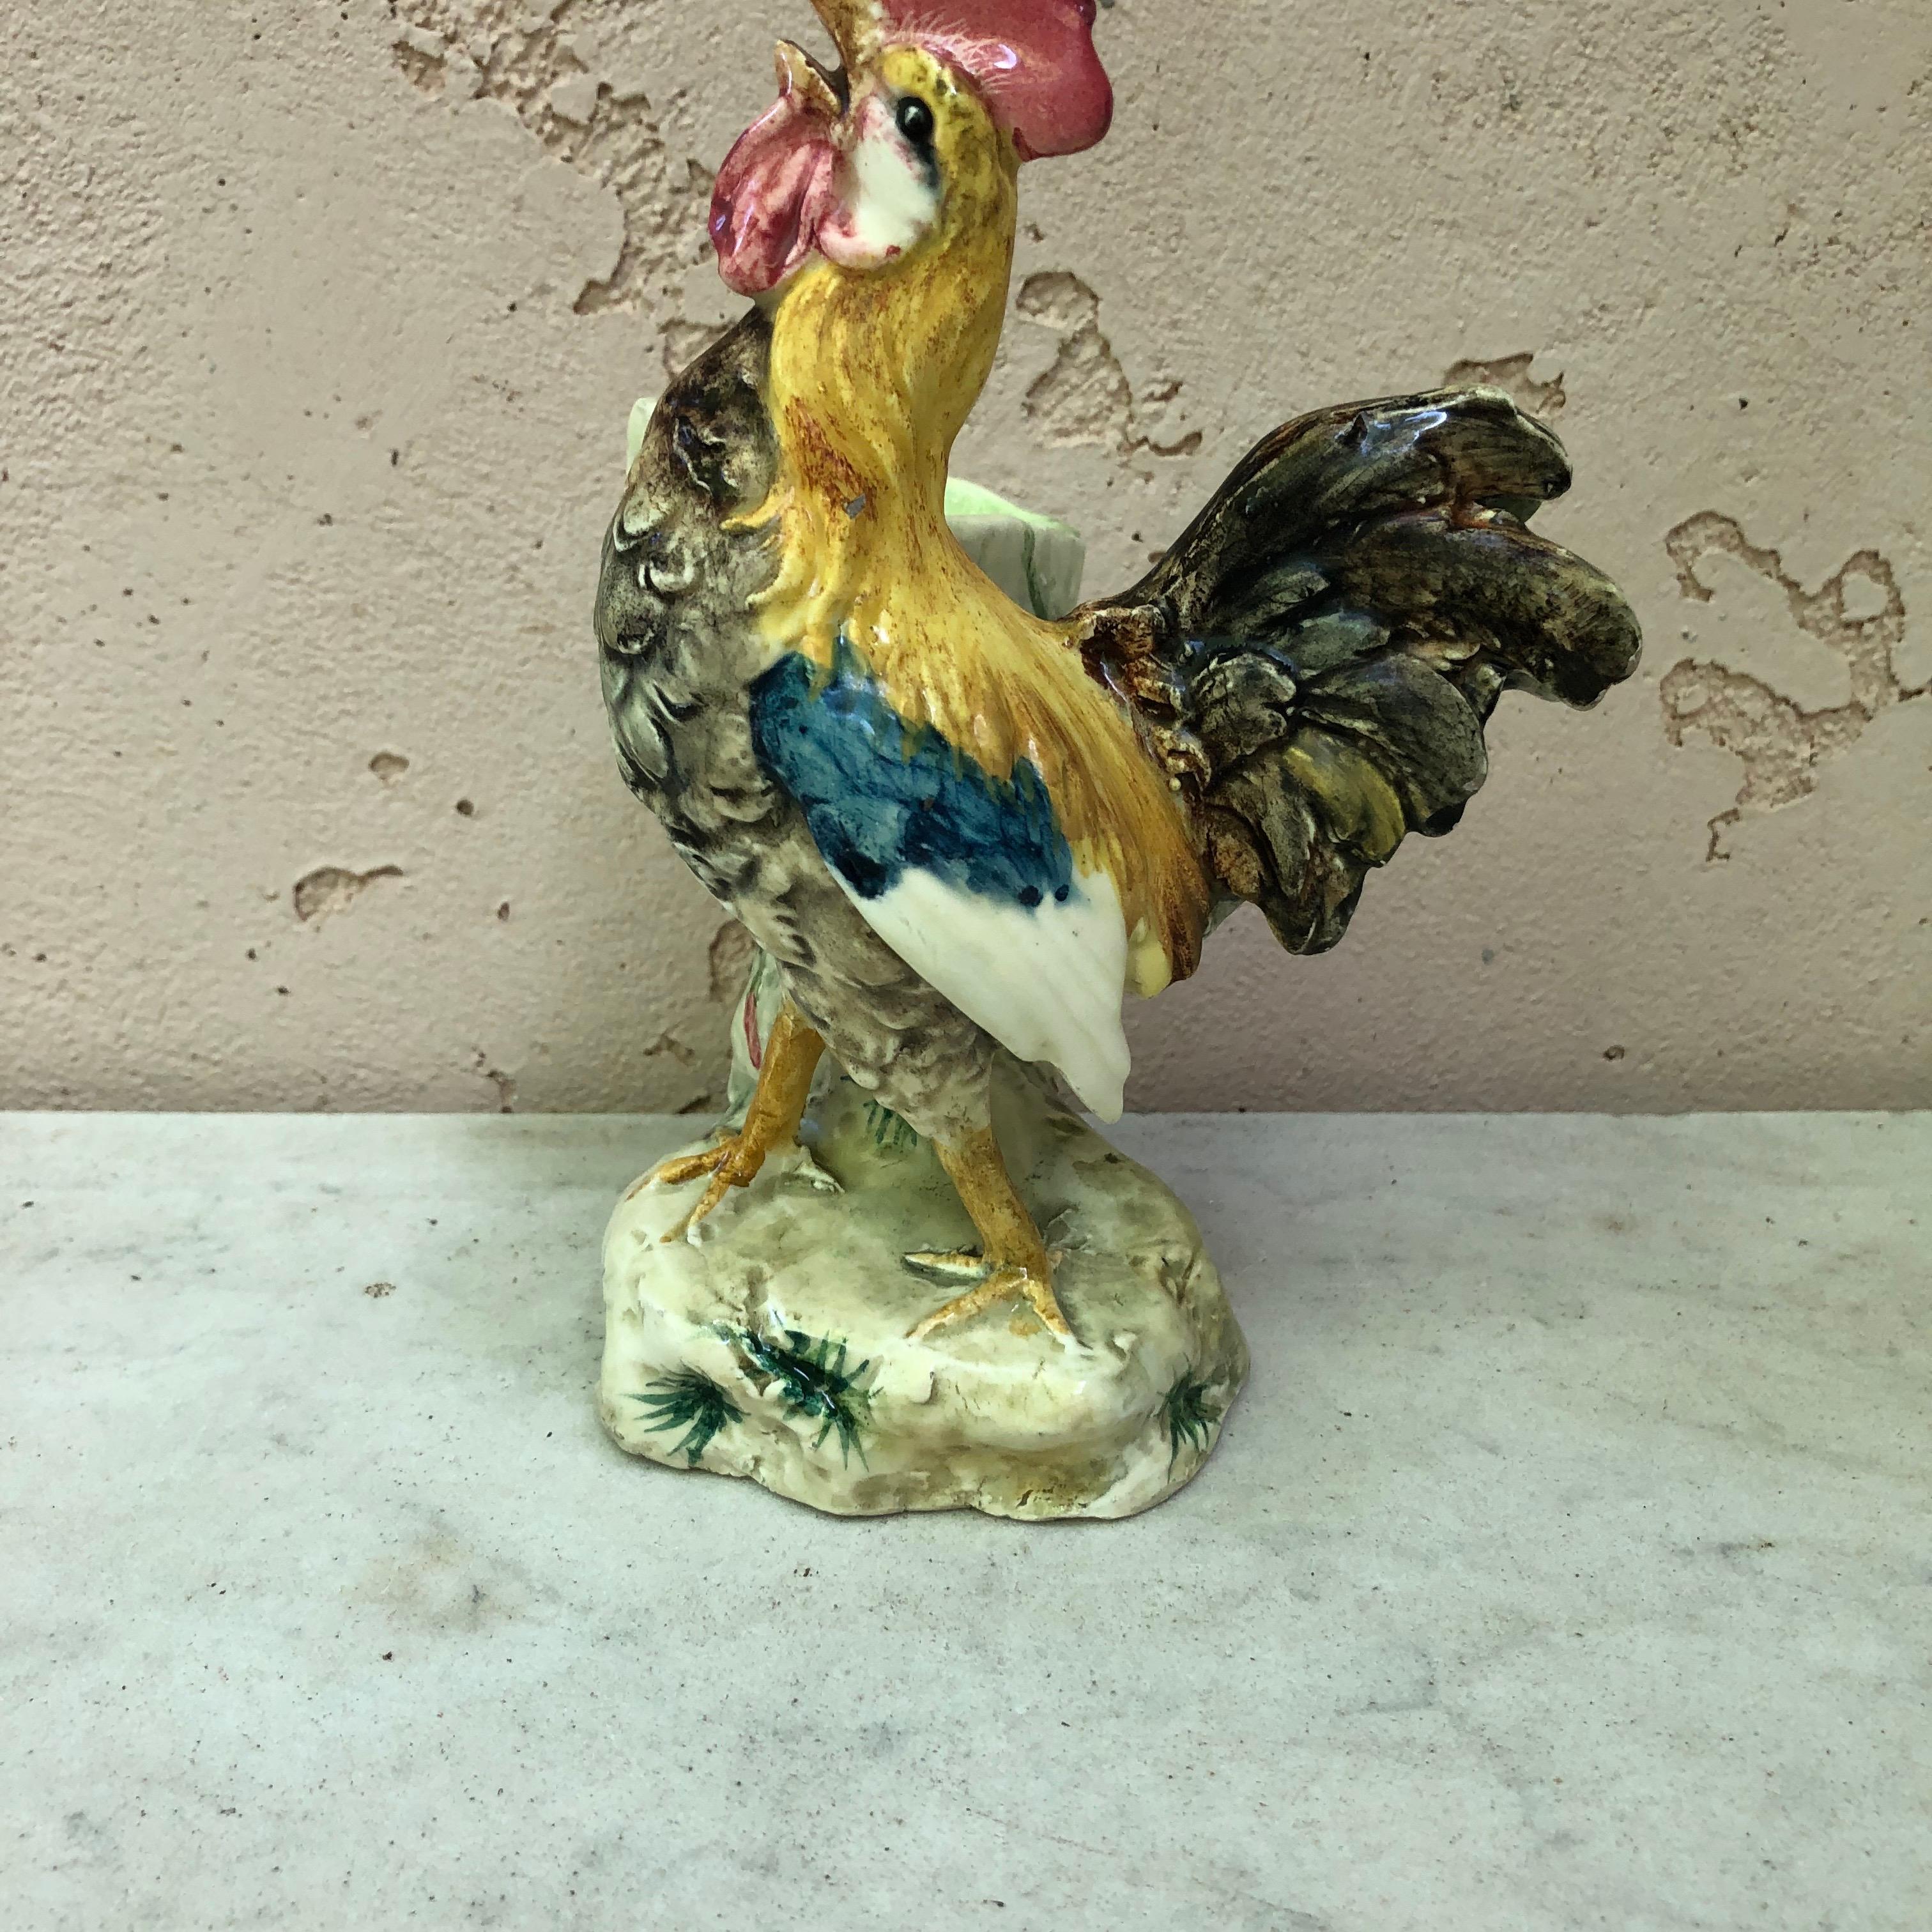 19th Century Majolica Rooster vase Massier.
Beautiful and unusual colors.